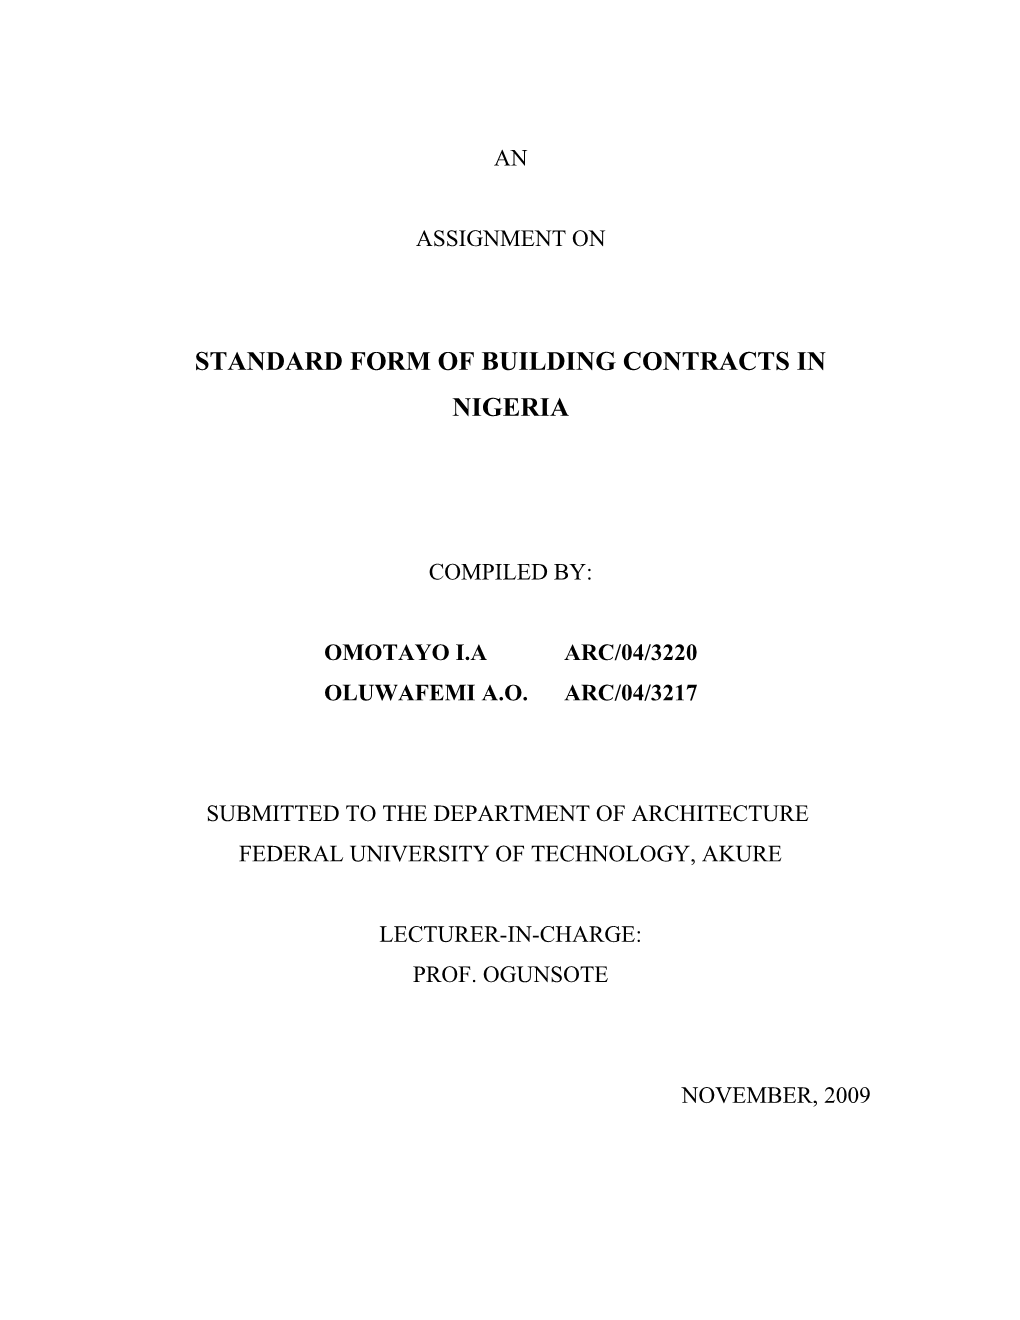 Standard Form of Building Contracts in Nigeria